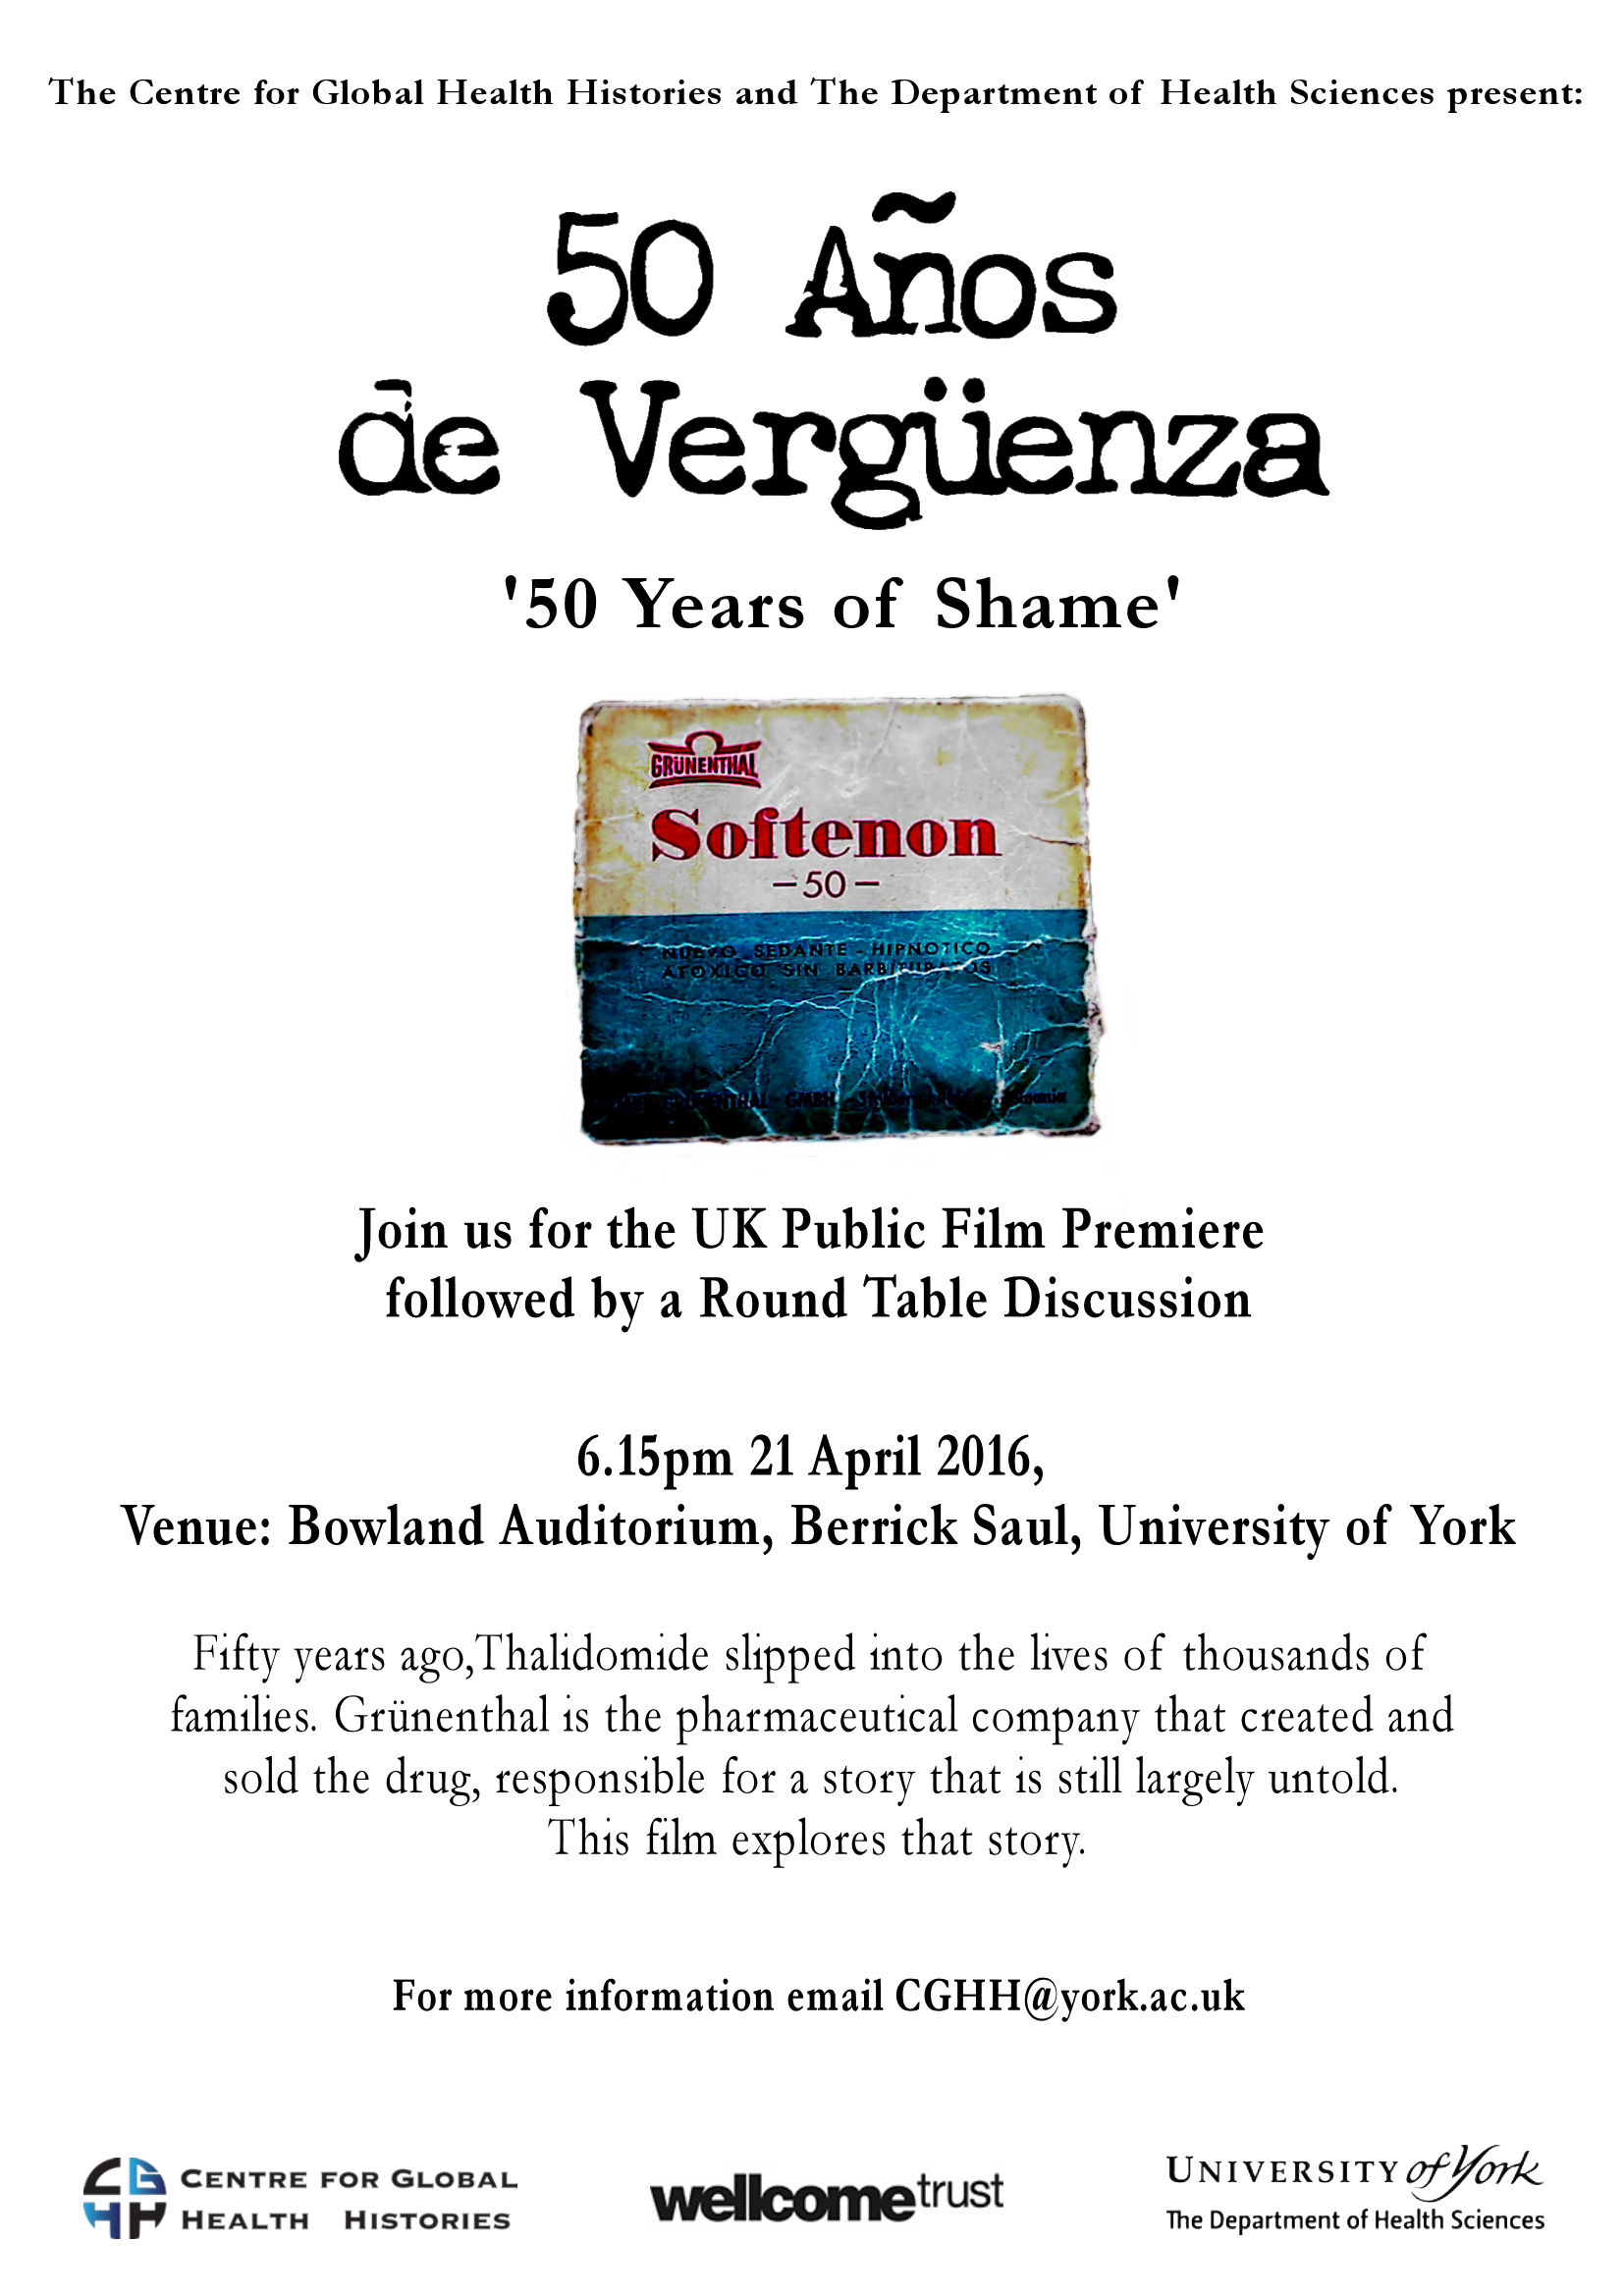 Poster advertising the film 50 Years Of Shame, the story of the thalidomide tragedy